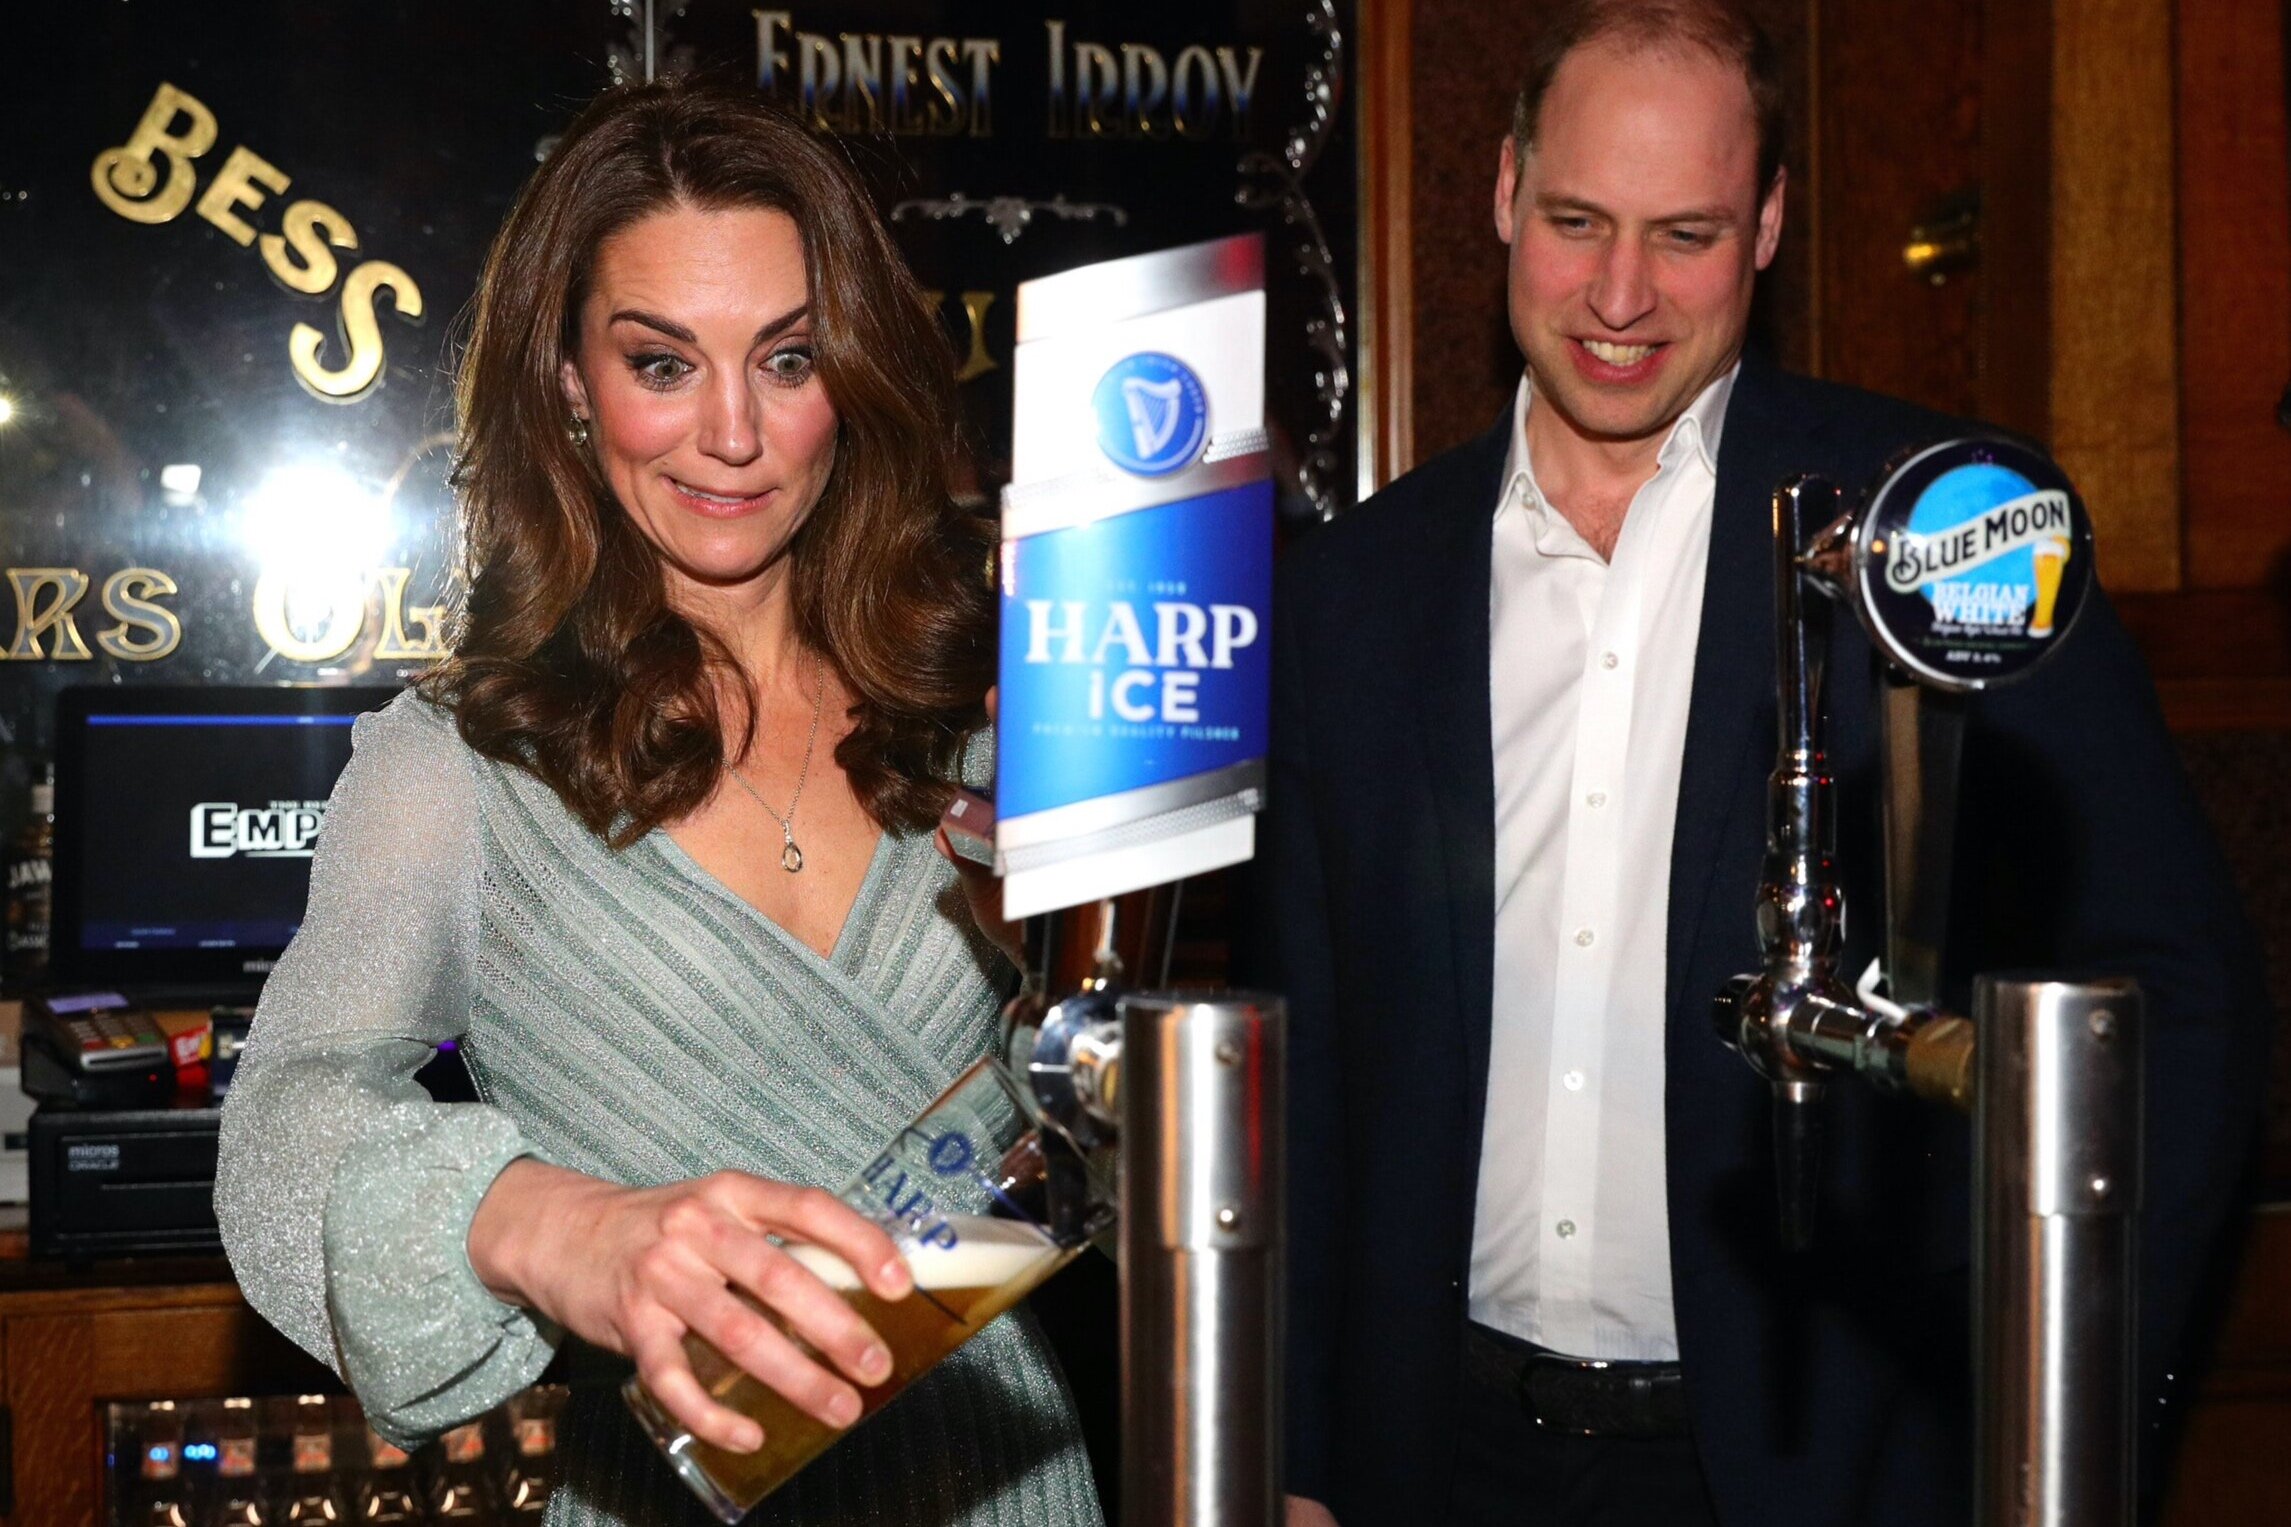  The Duchess of Cambridge pulls a pint with the Duke of Cambridge during their visit to Belfast Empire Hall for an informal party to celebrate inspirational young people who are making a real difference in Northern Ireland as part of their two day vi